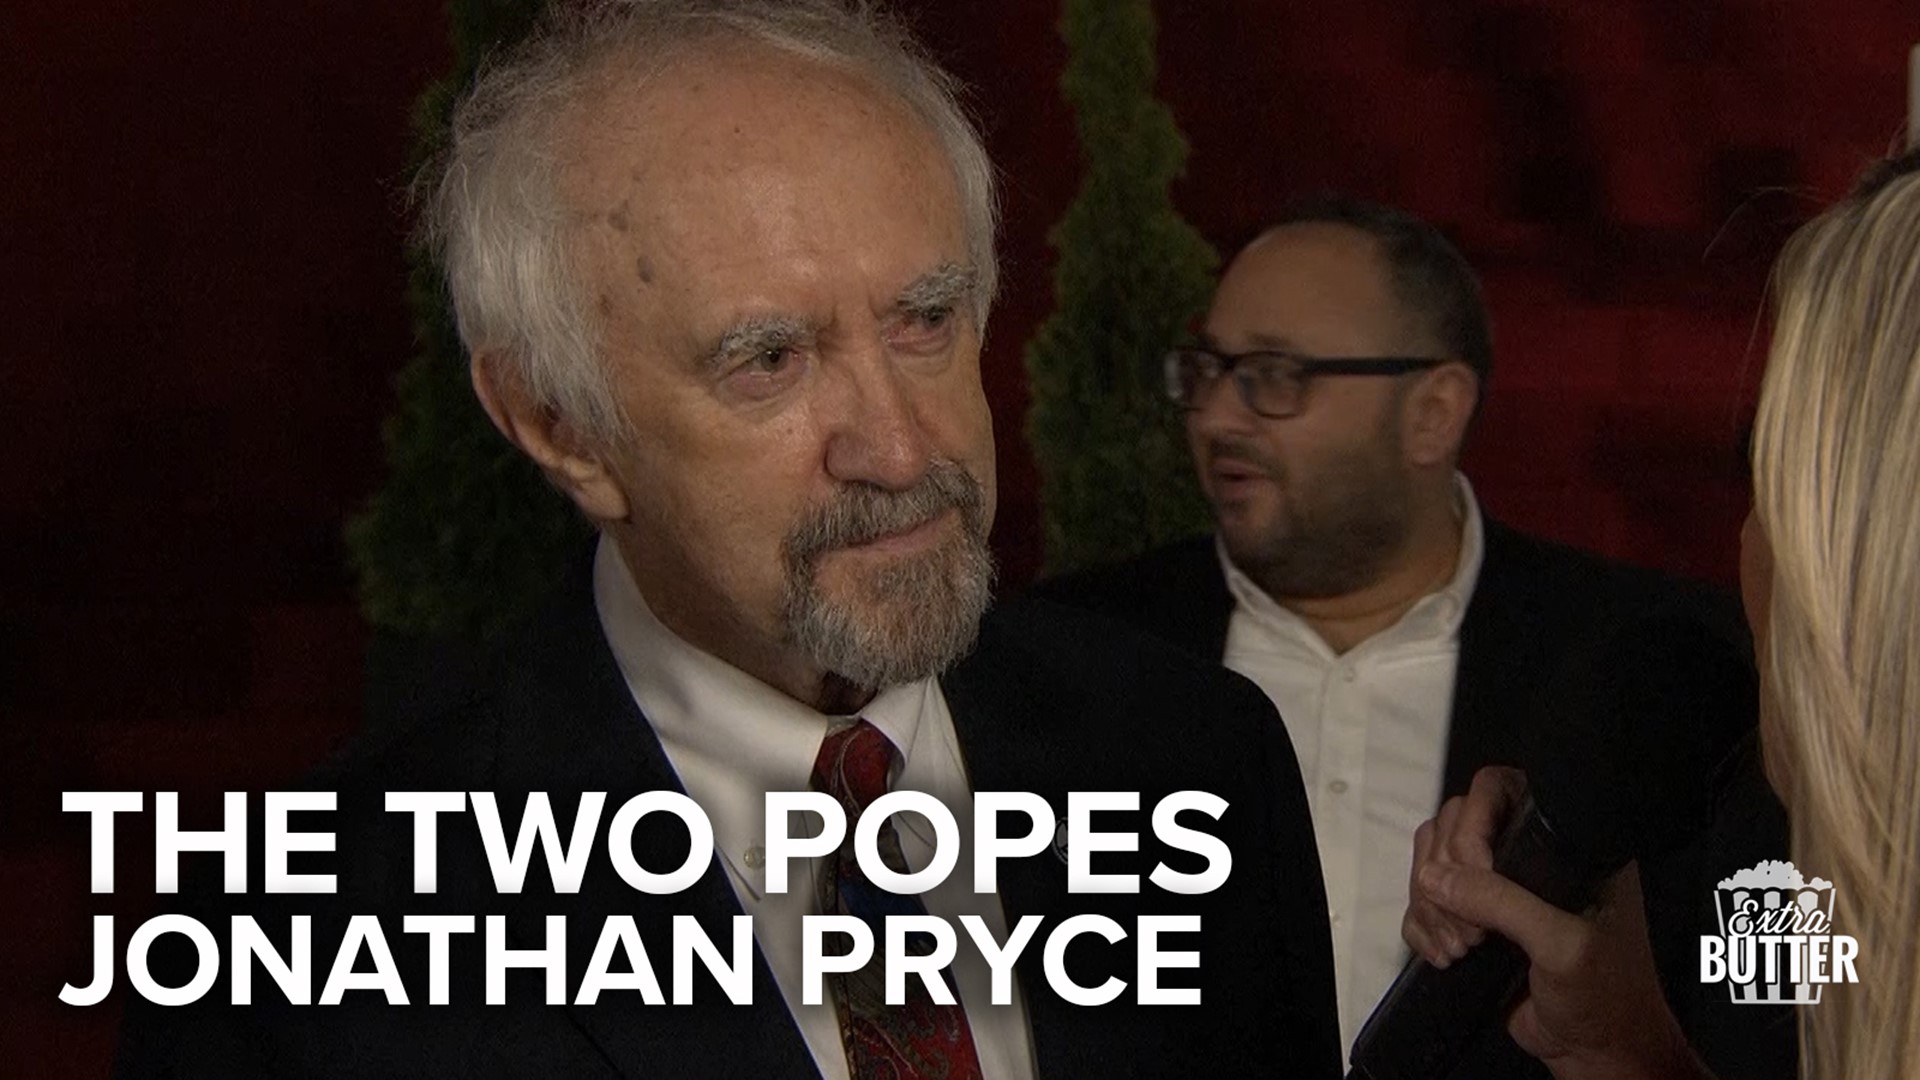 Jonathan Pryce talks about making the Netflix movie 'The Two Popes' and working alongside Anthony Hopkins. Pryce plays the future Pope Francis.